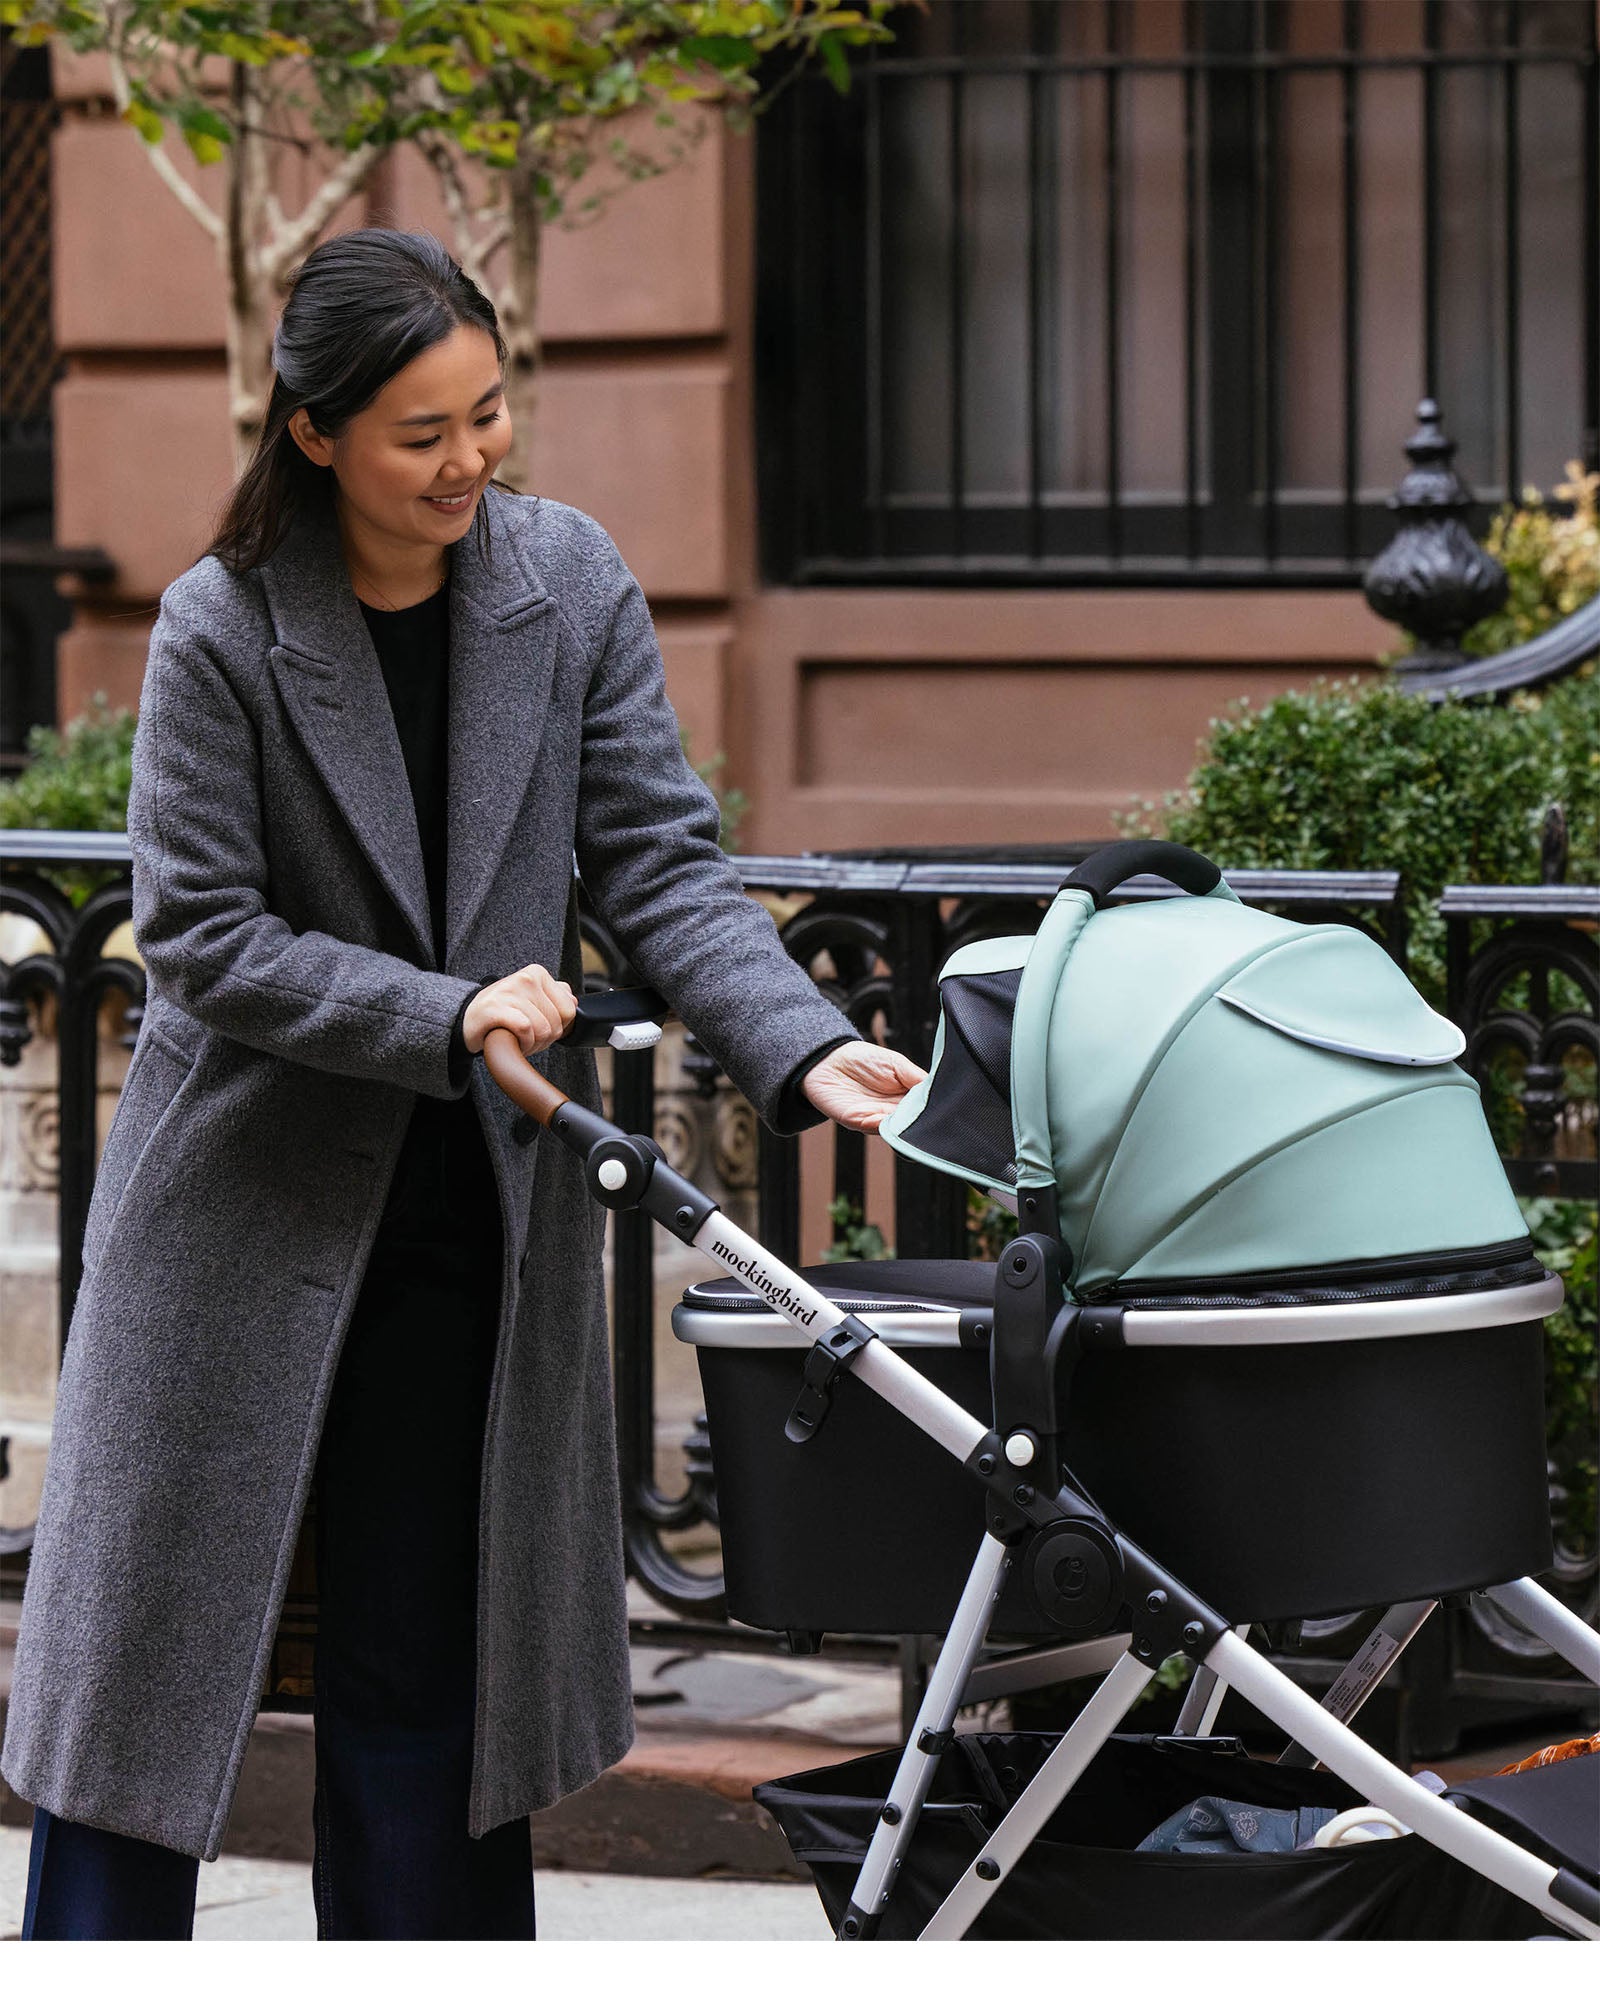 A woman in a gray coat smiling at a baby in a teal mockingbird-prod Bassinet on a city sidewalk.